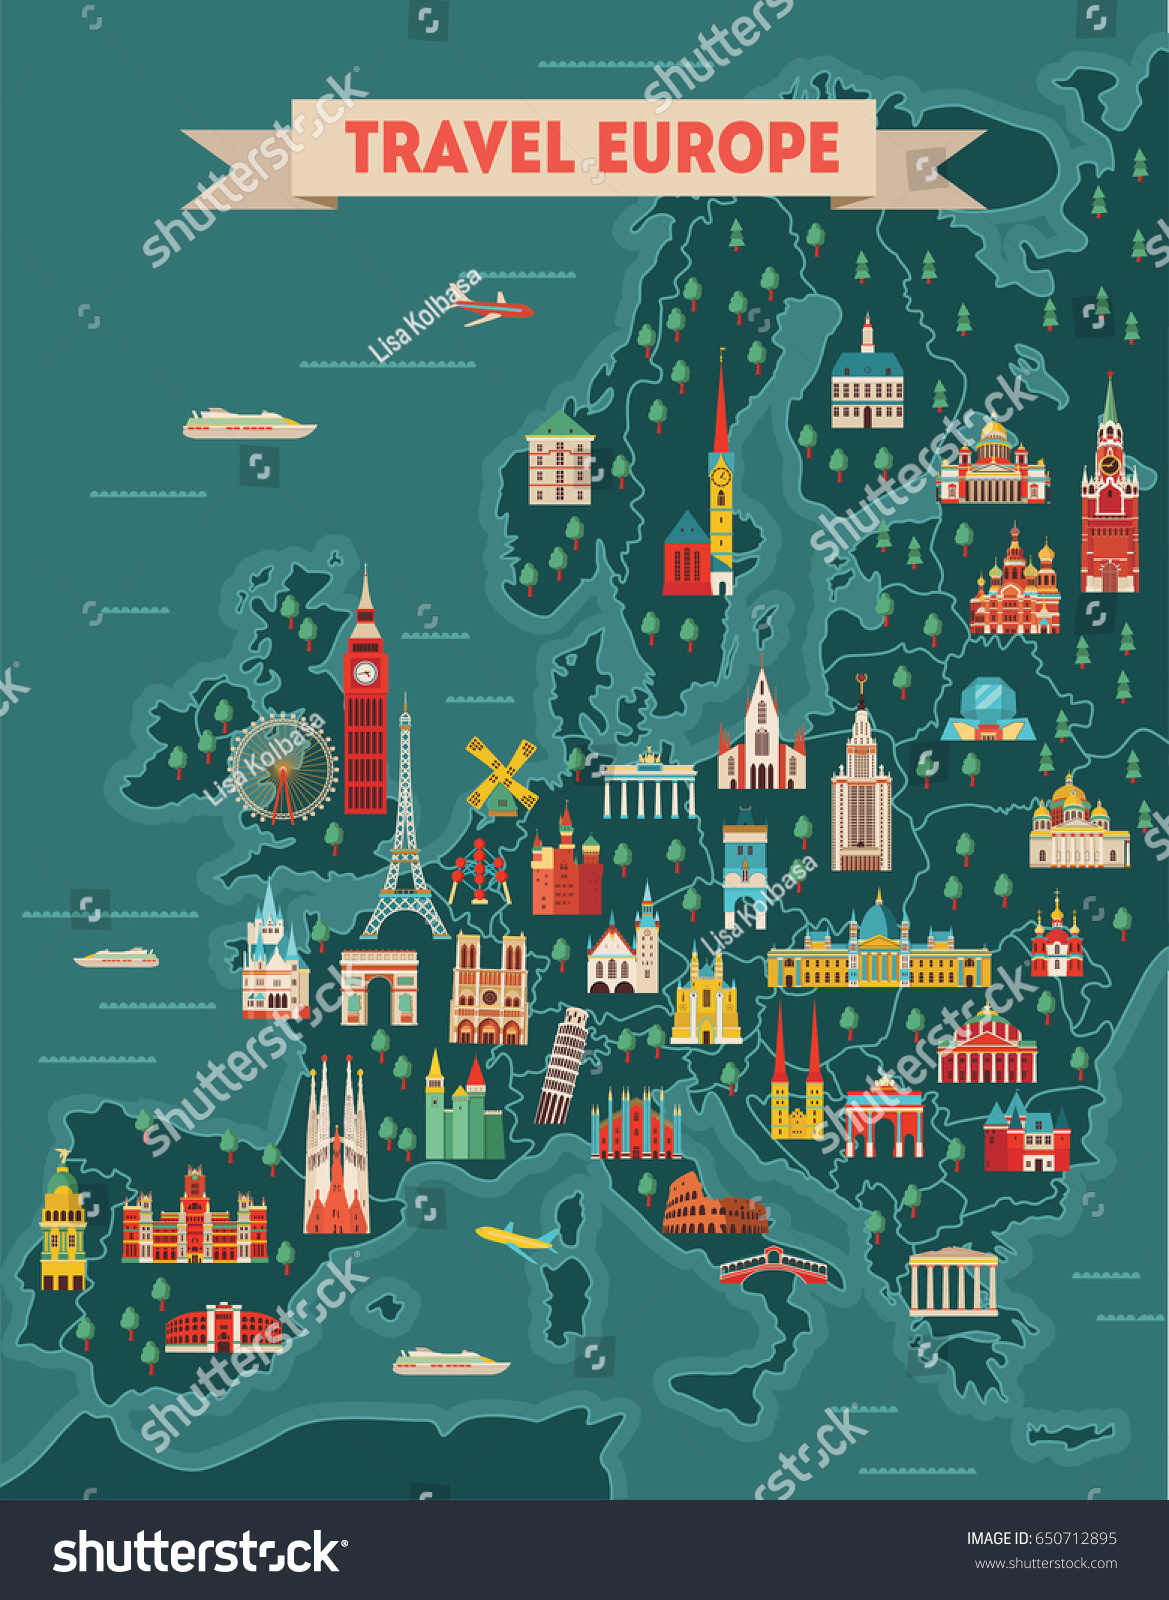 Europe Travel Map Poster Travel Tourism Stock Vector 650712895 - Shutterstock1169 x 1600